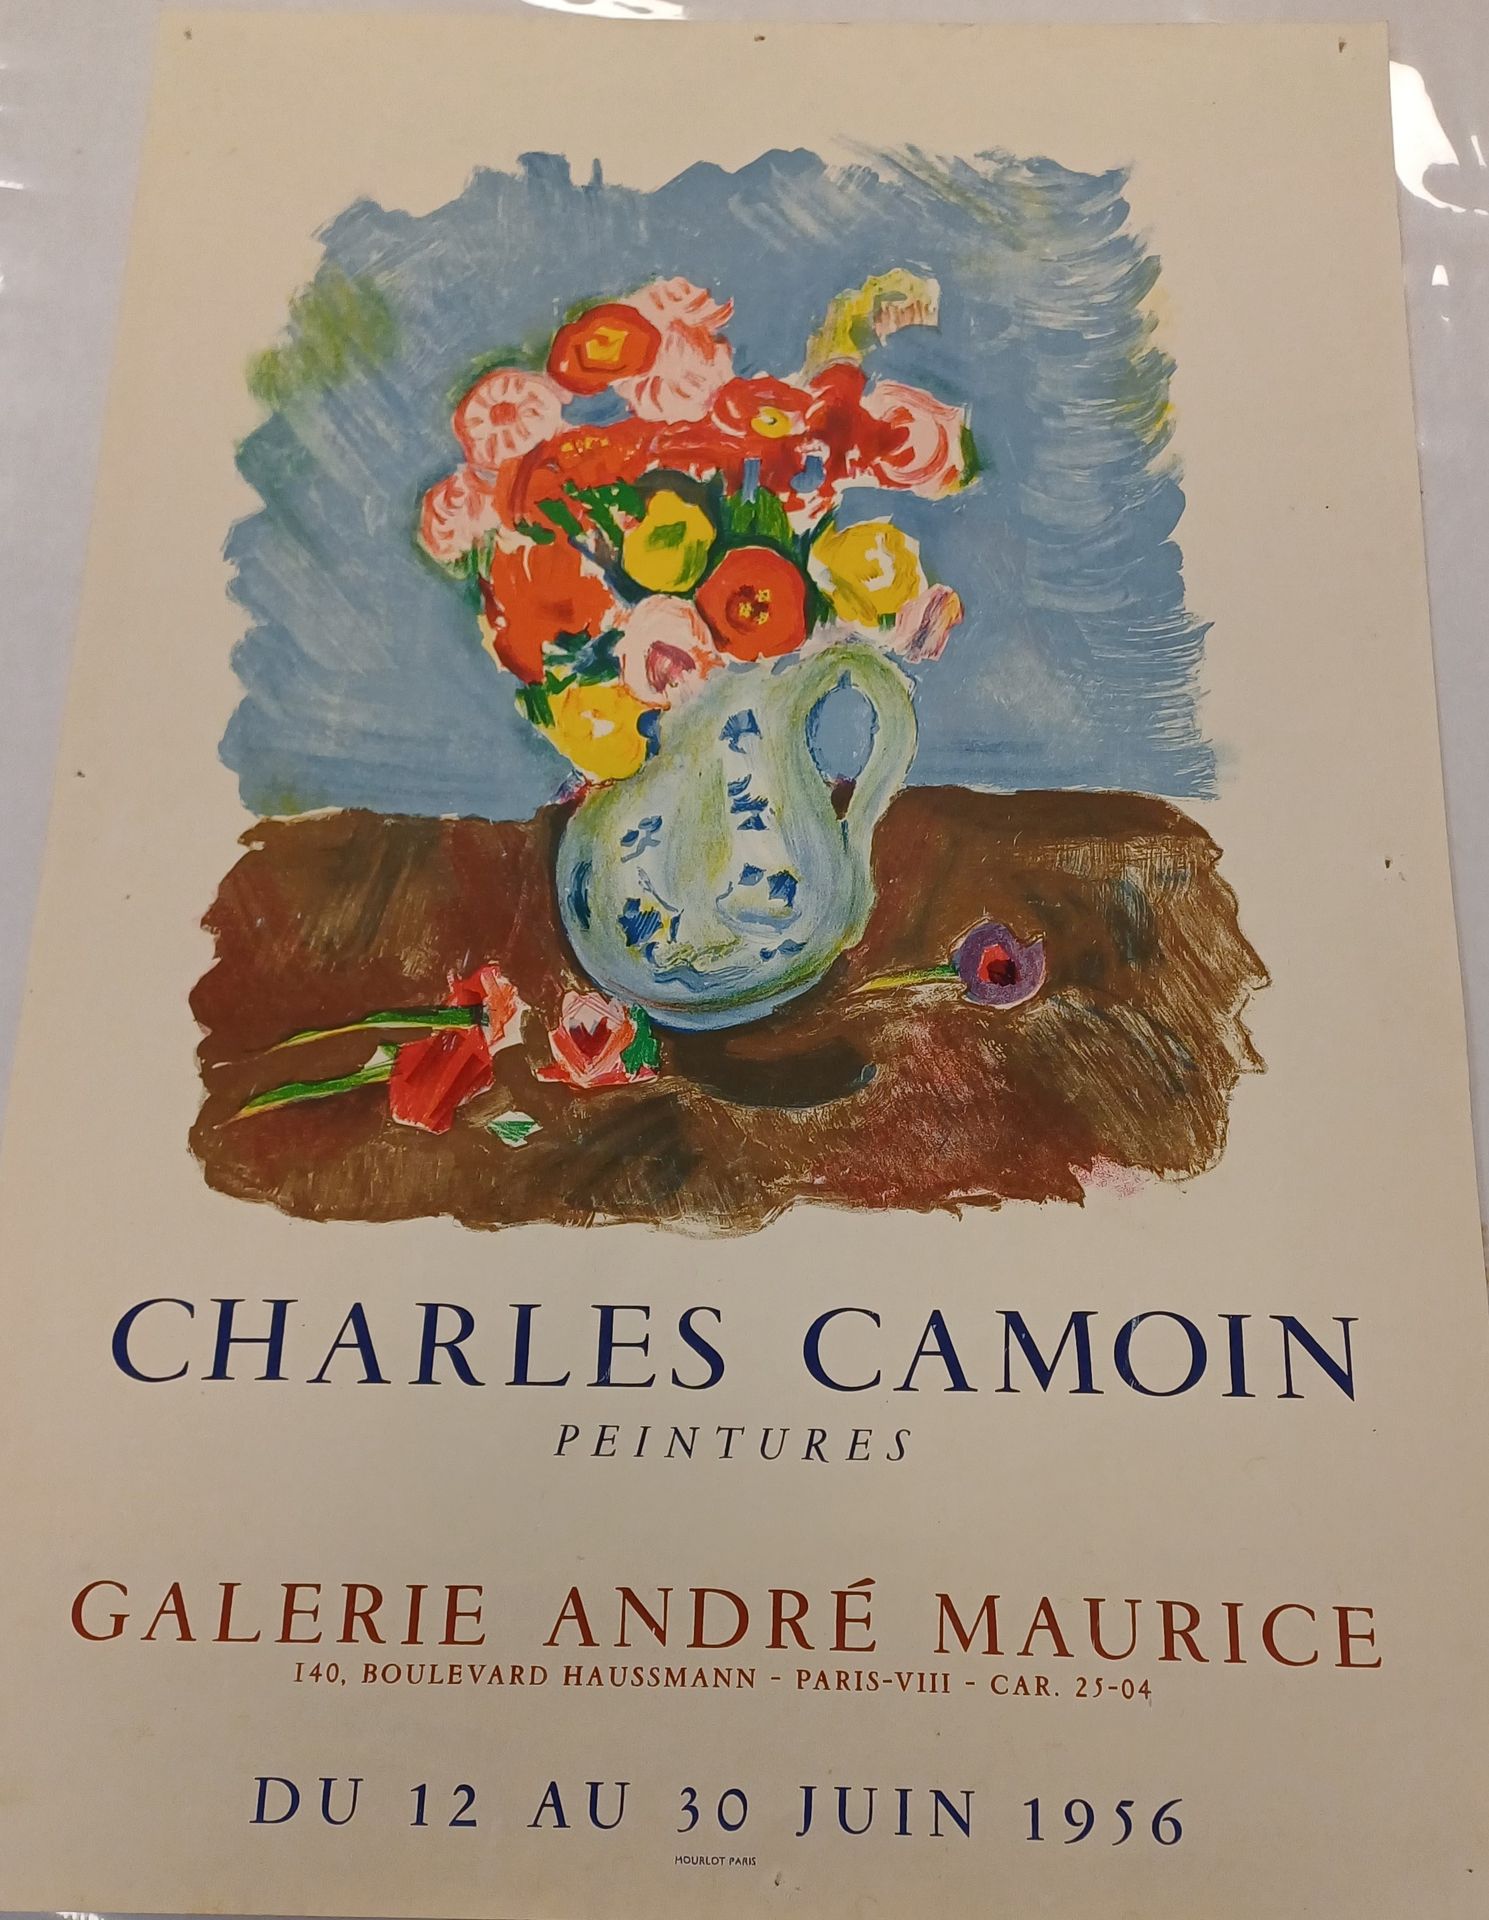 Charles Camoin Affiche Charles Camoin
Galerie André Maurice 1956
67 x 46 cm